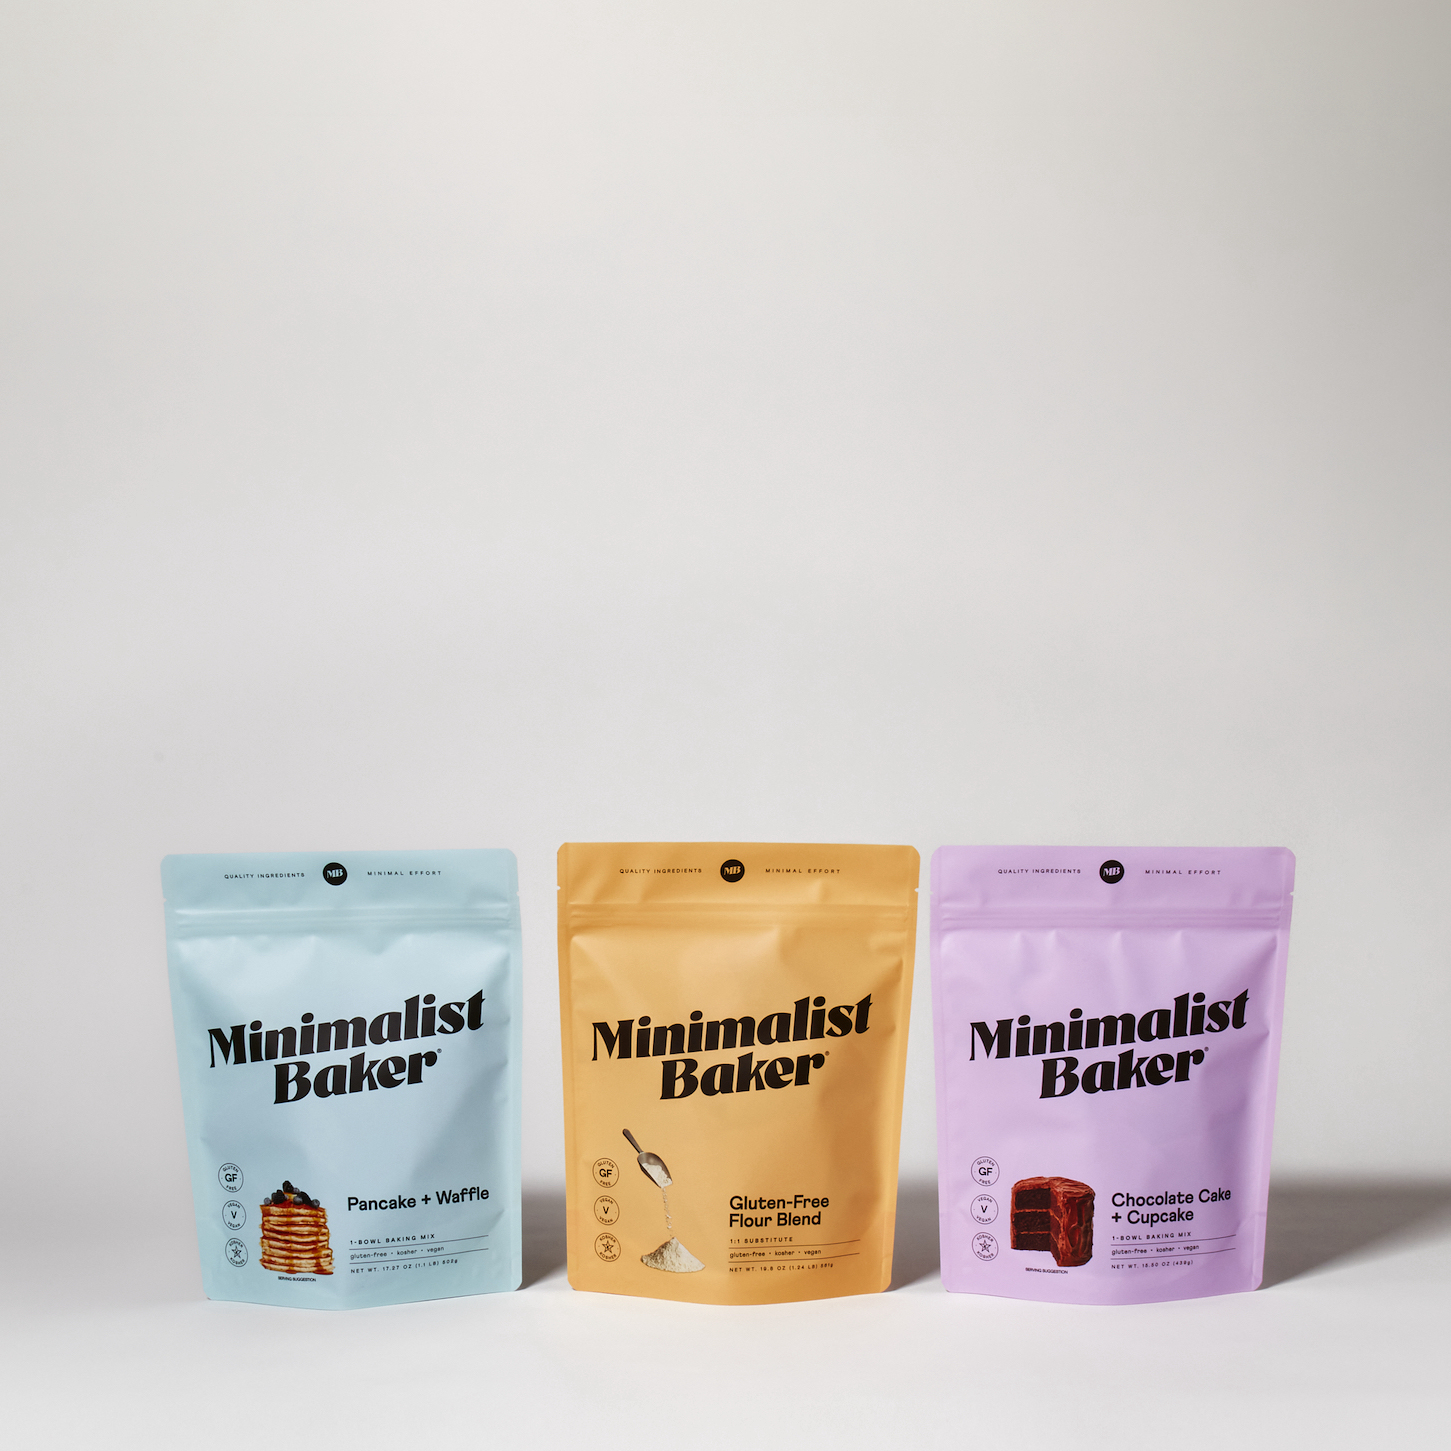 Bags of our vegan gluten-free baking mixes side by side on a white background